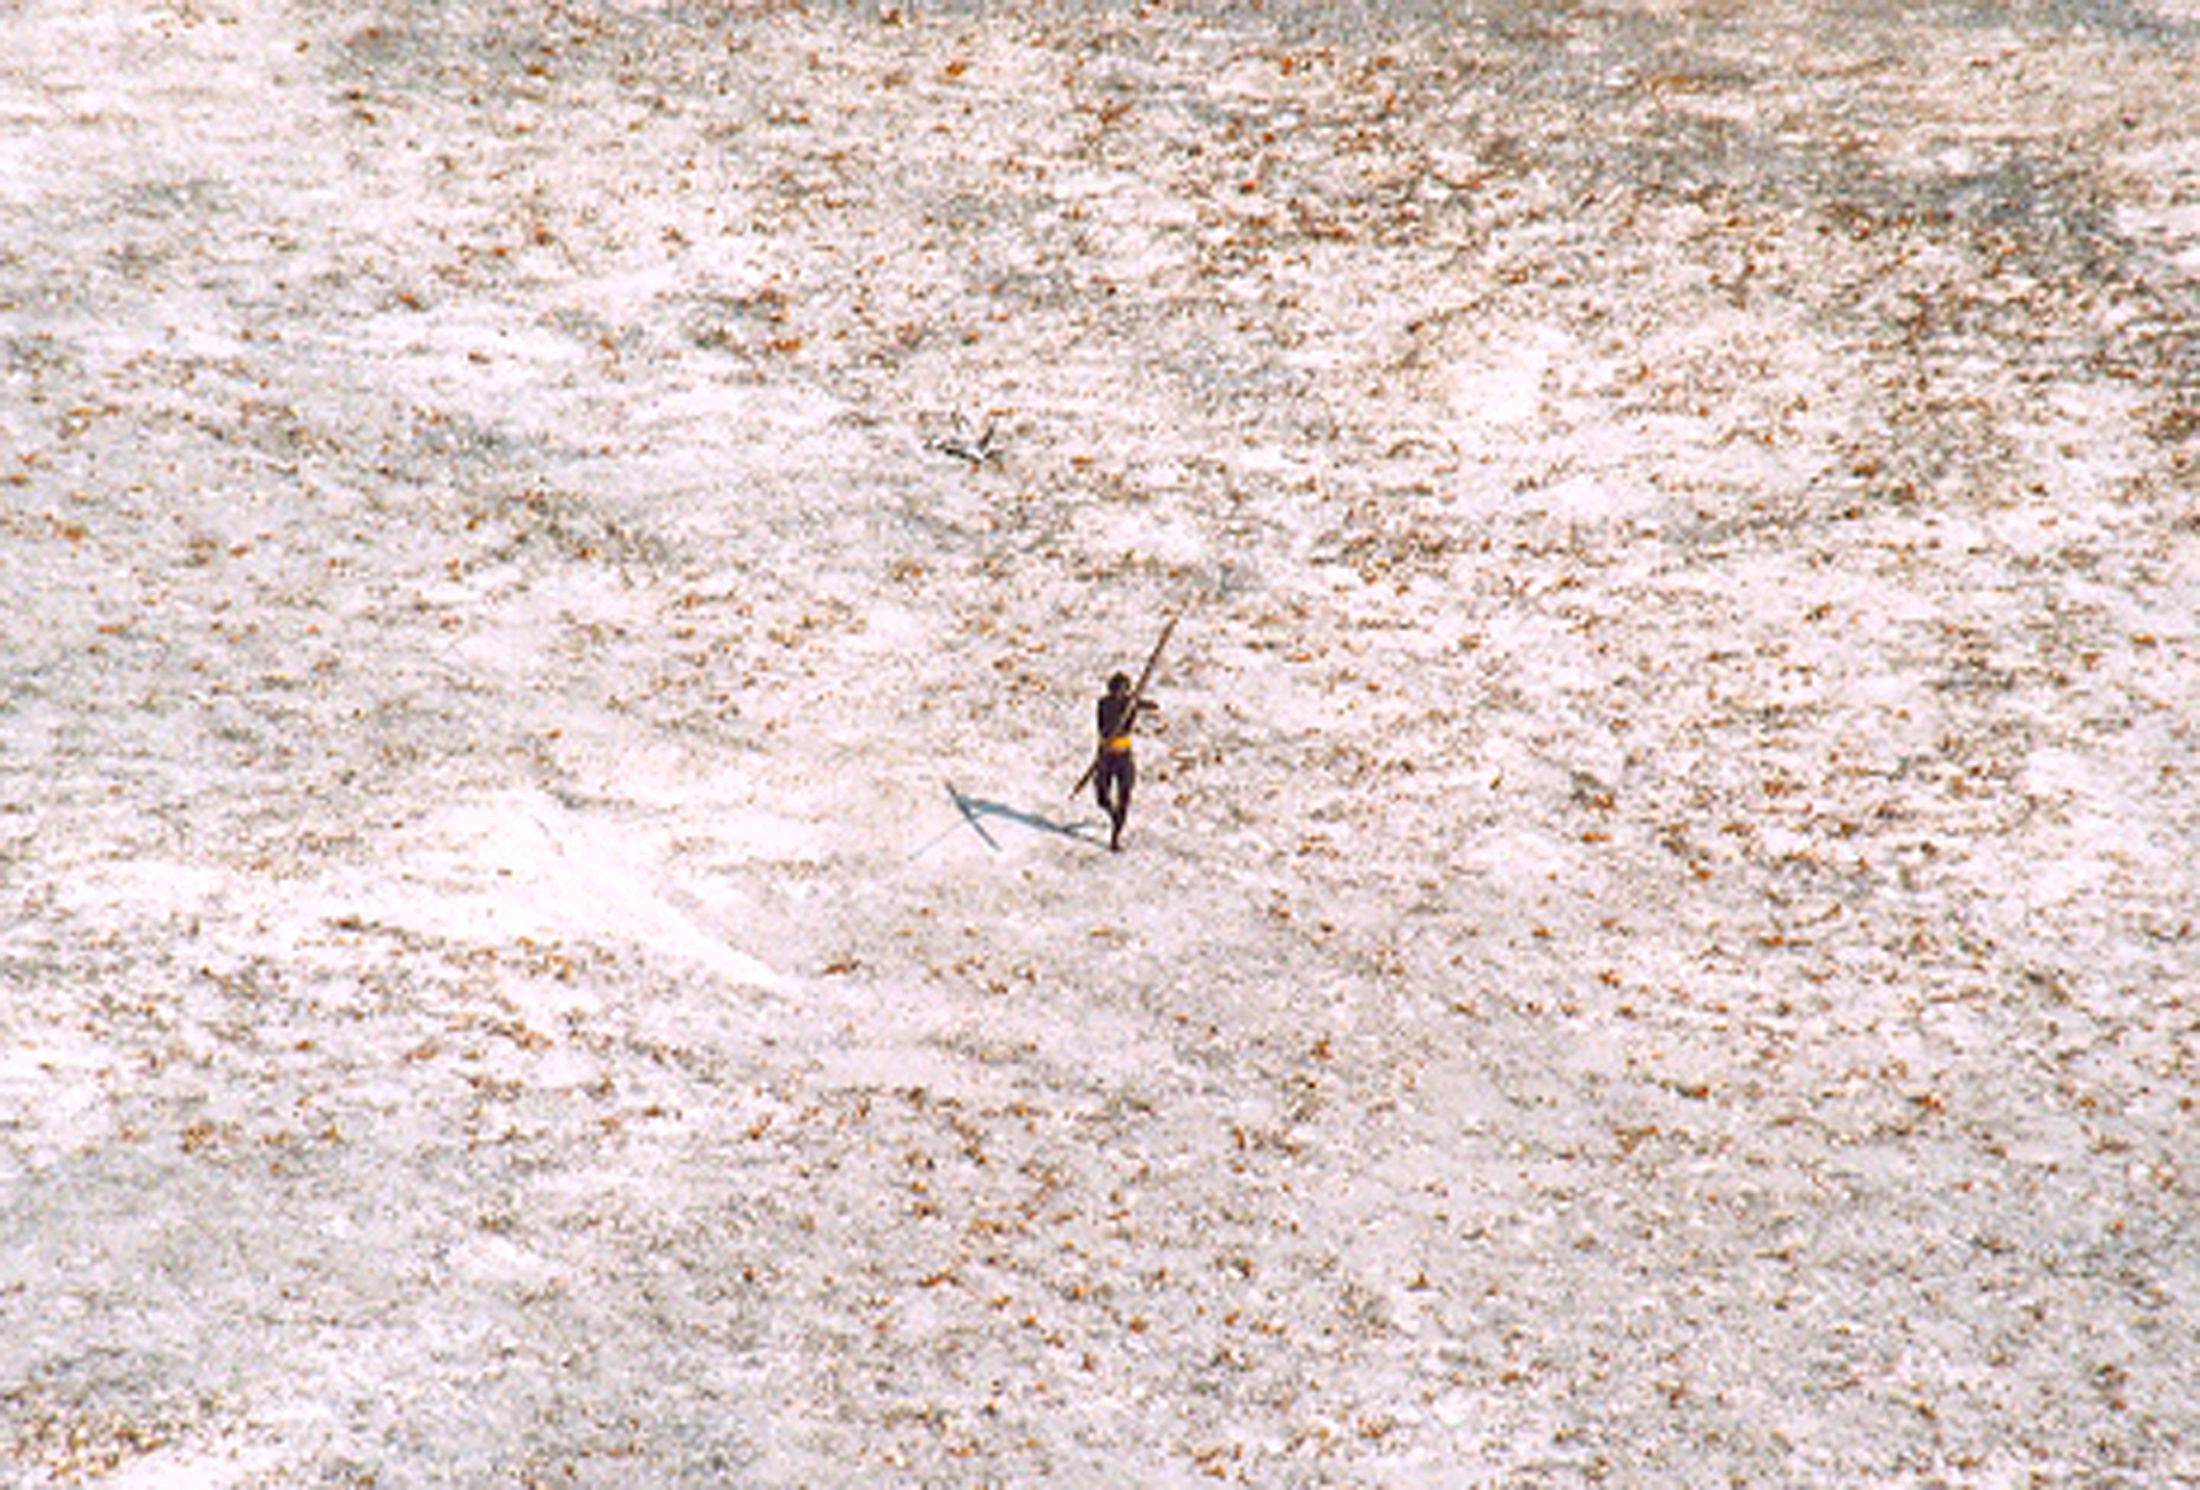 PHOTO: In this file photo a Sentinel tribal man aims with his bow and arrow at an Indian Coast Guard helicopter as it flies over the island for a survey of the damage caused by the tsunami in India's Andaman and Nicobar archipelago, Dec. 28, 2004.